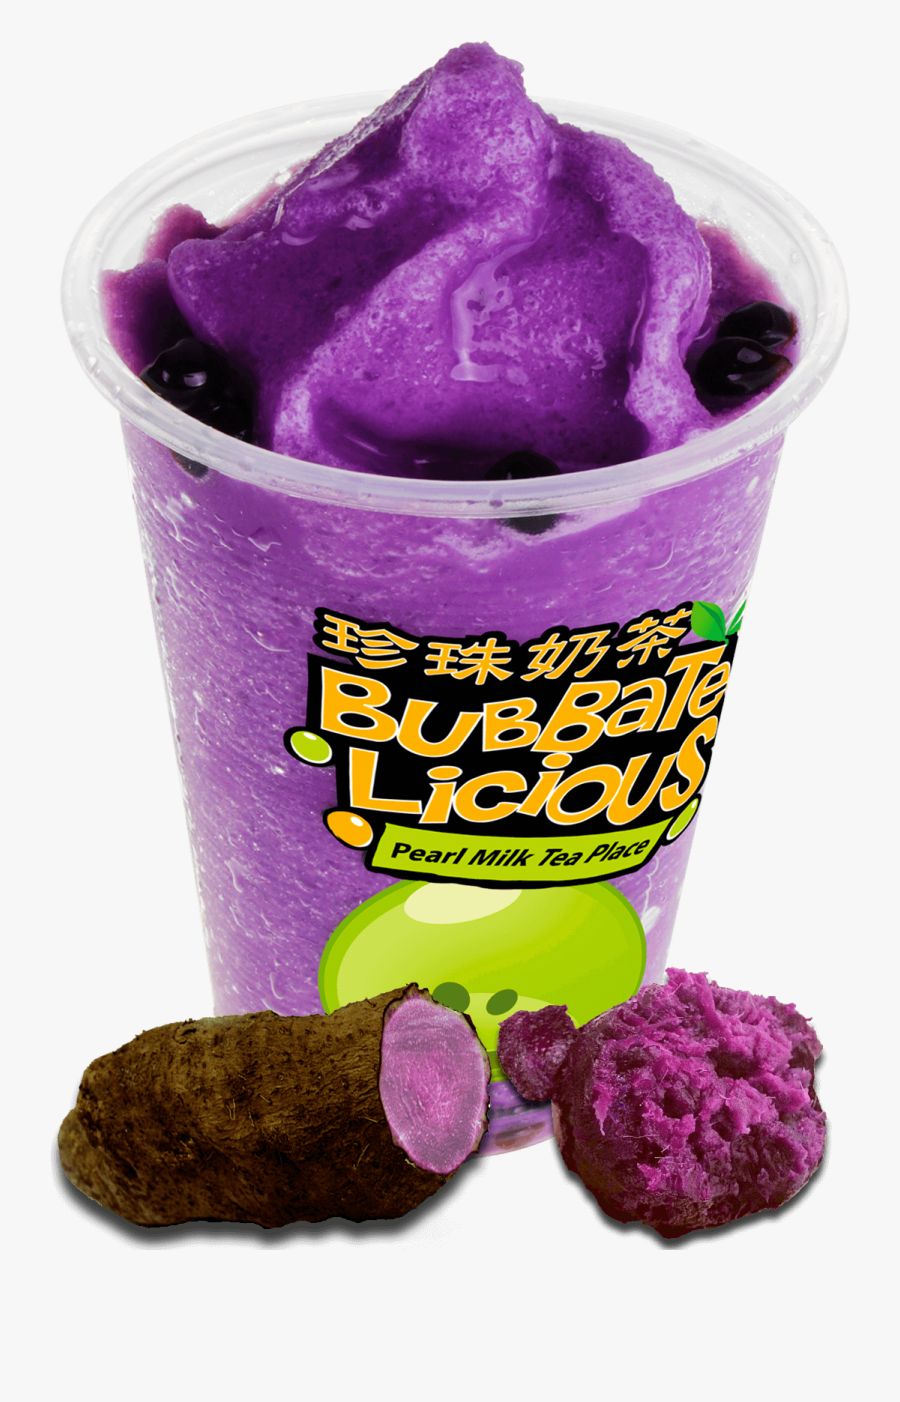 Ube Png, Transparent Clipart